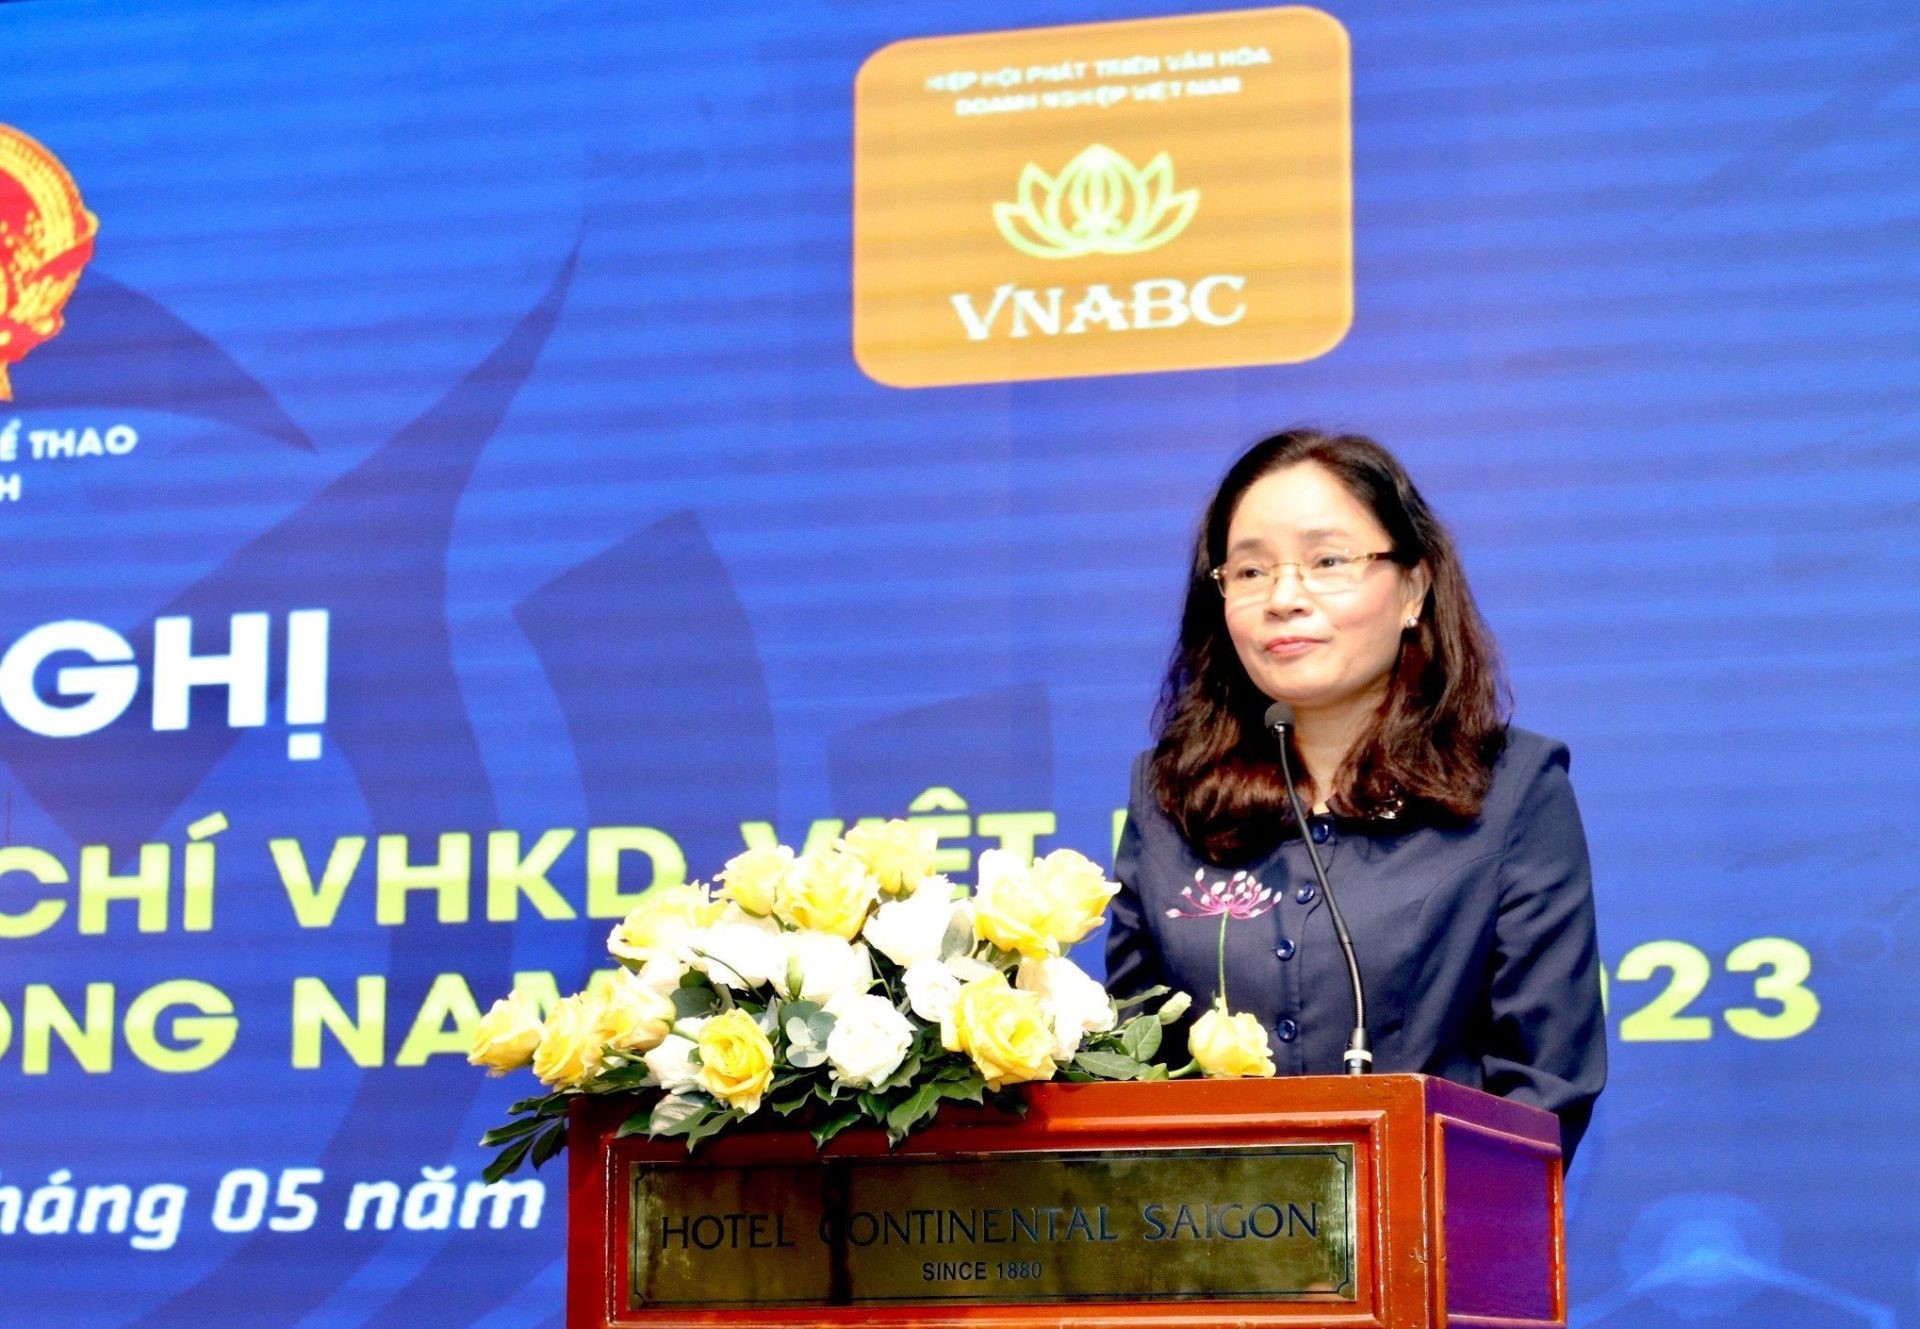 Deputy Minister of Culture, Sports and Tourism- Trinh Thi Thuy speaking at the opening of the Conference.